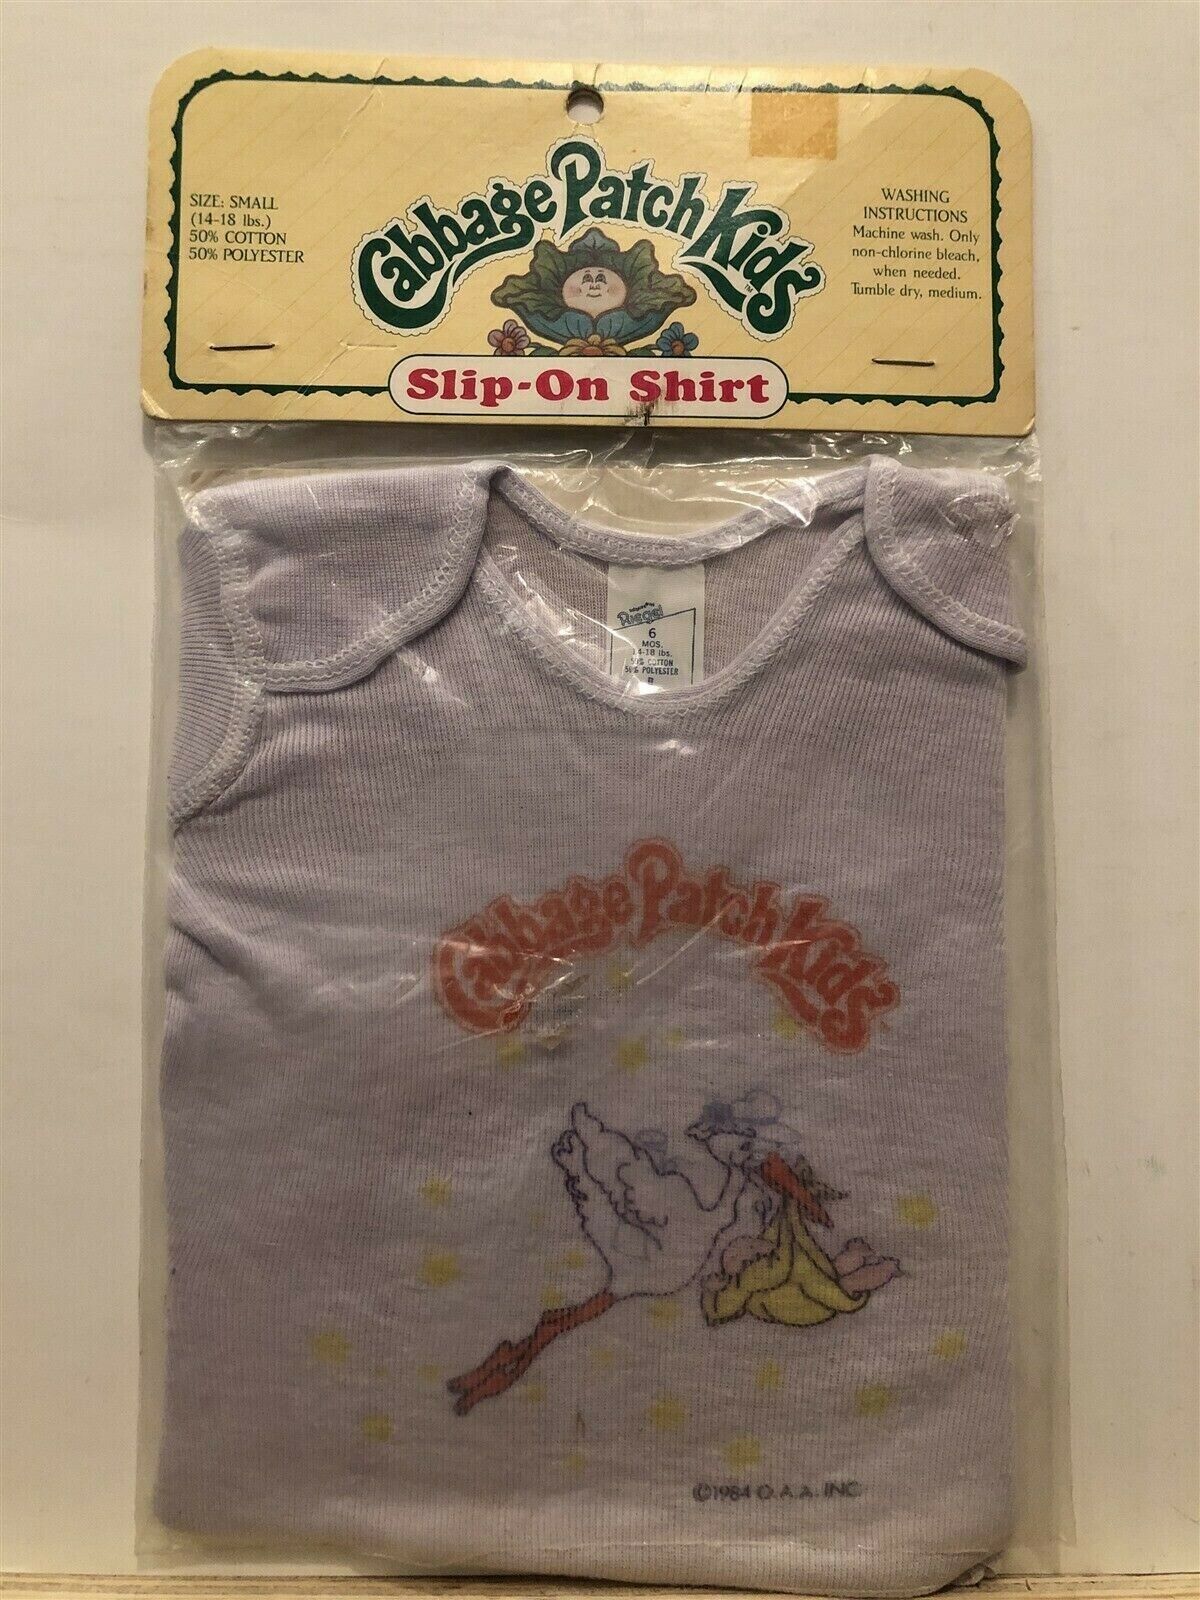 1984 Cabbage Patch Kids Doll Slip on shirt 6 months 14-18 lbs Small Size Vtg